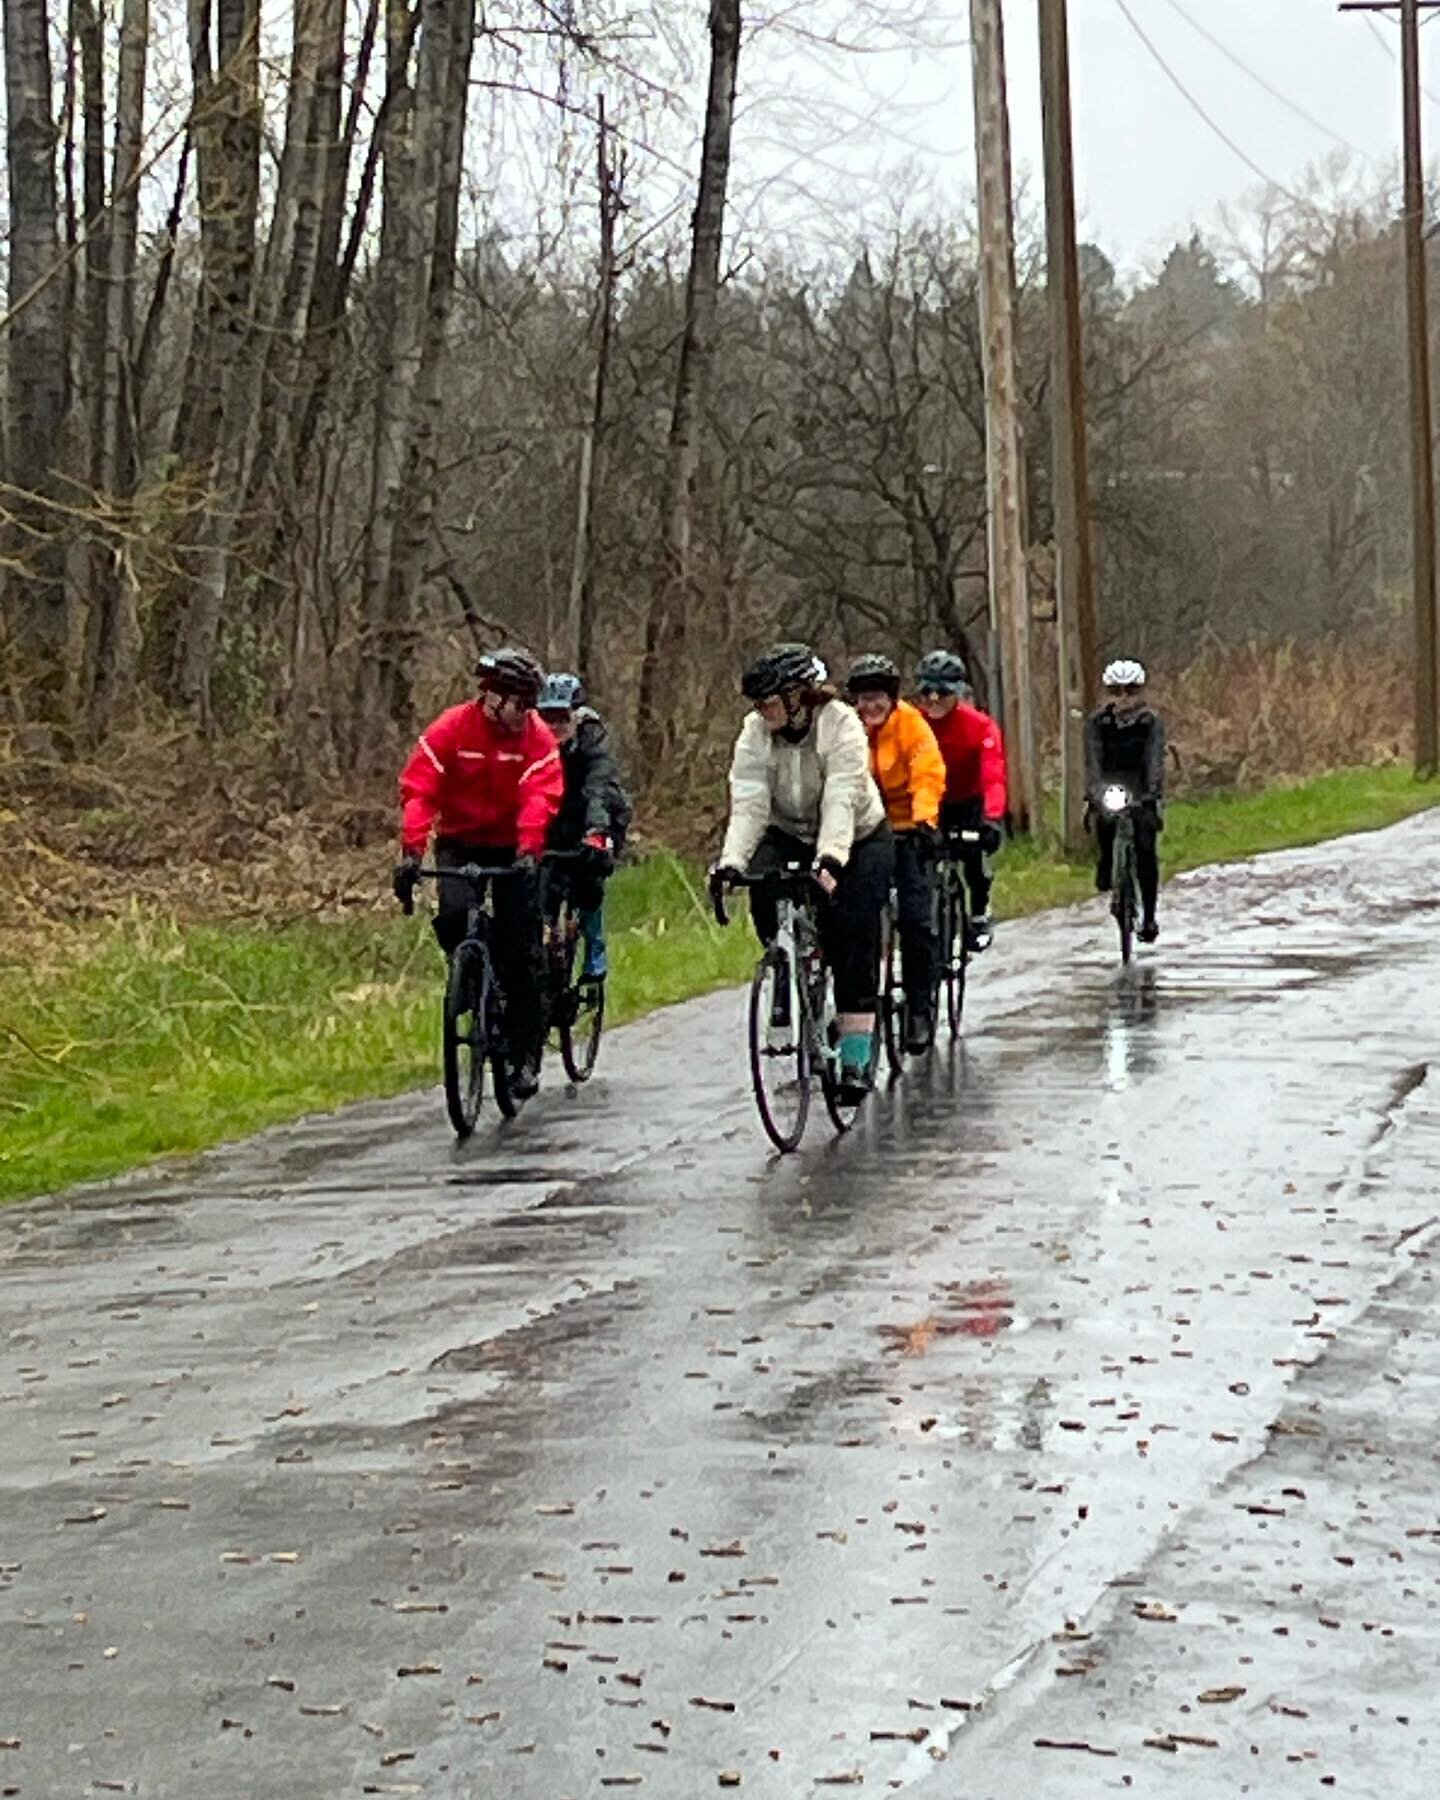 LC3 Ride Leader Clinic - thanks to @cyclingbc and Vicki and Bruce for the coaching! We also kicked off the 2023 season with our club social and new kit day!Thanks to the great LC3 volunteers for organizing the events today. Two weeks to ride season! 